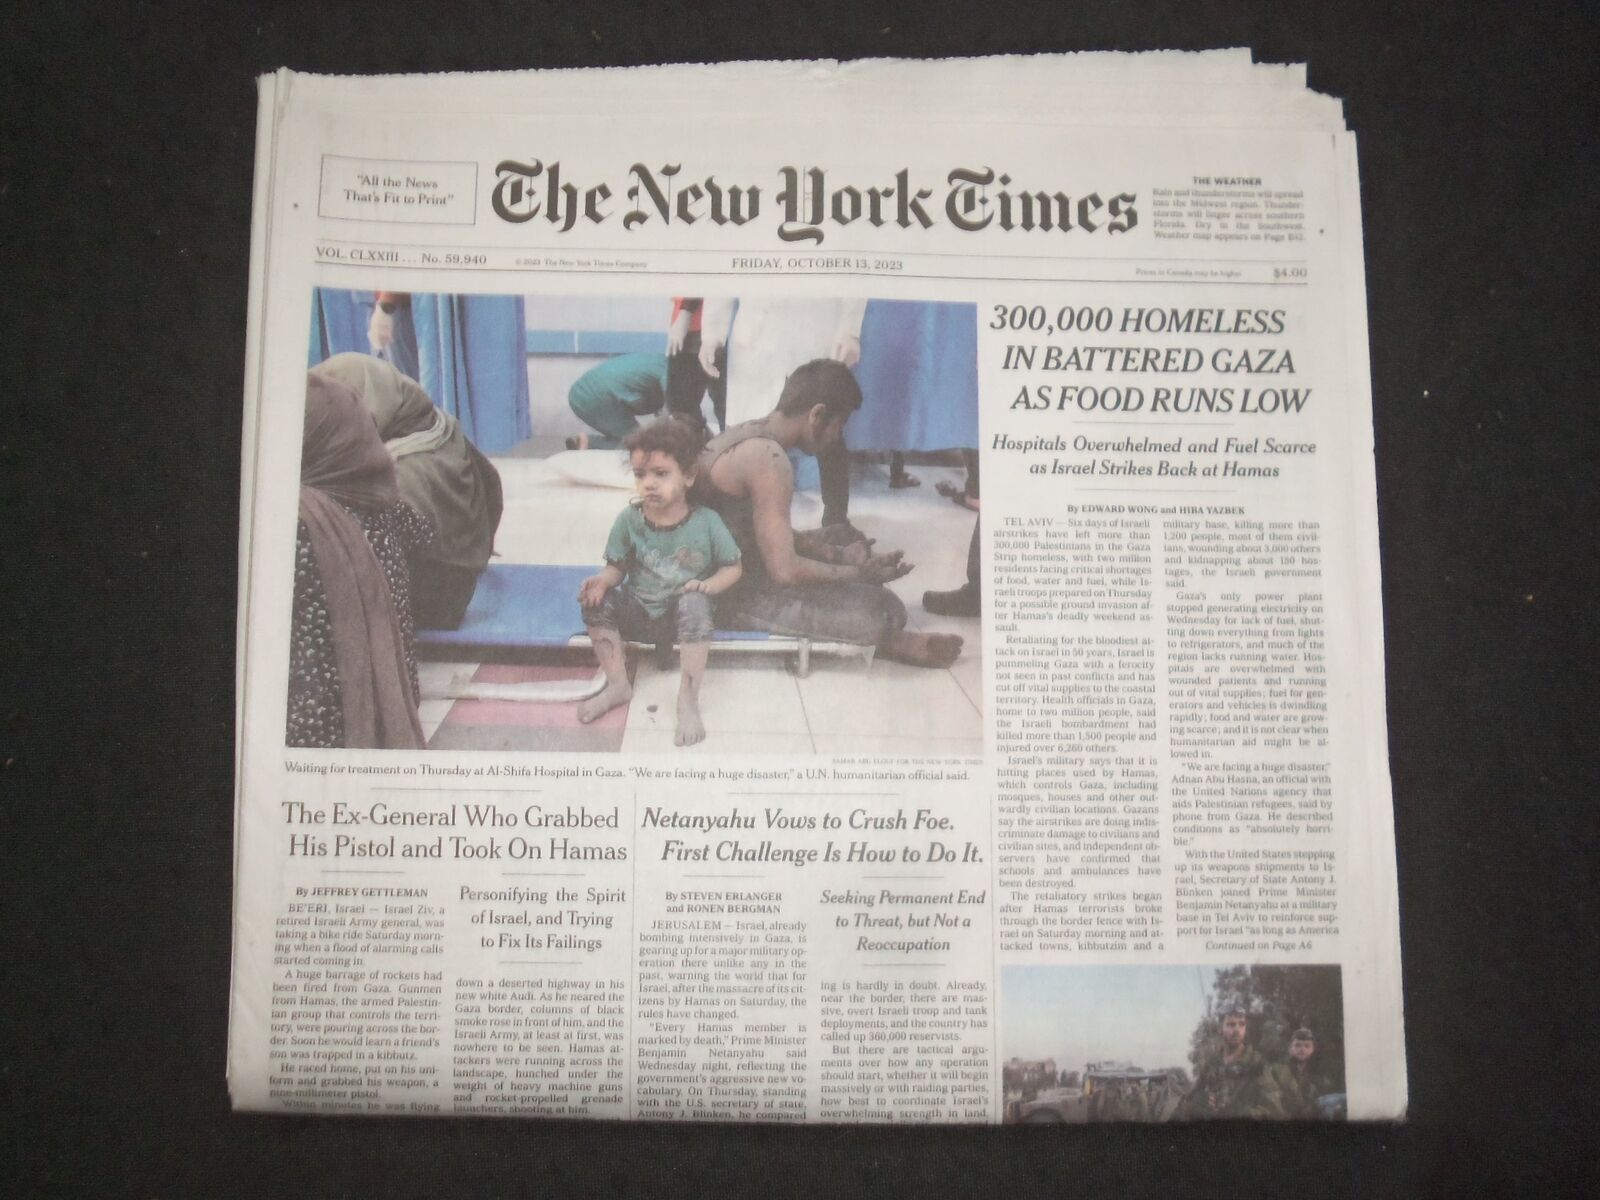 2023 OCTOBER 13 NEW YORK TIMES - 300,000 HOMELESS BATTERED GAZA AS FOOD RUNS LOW